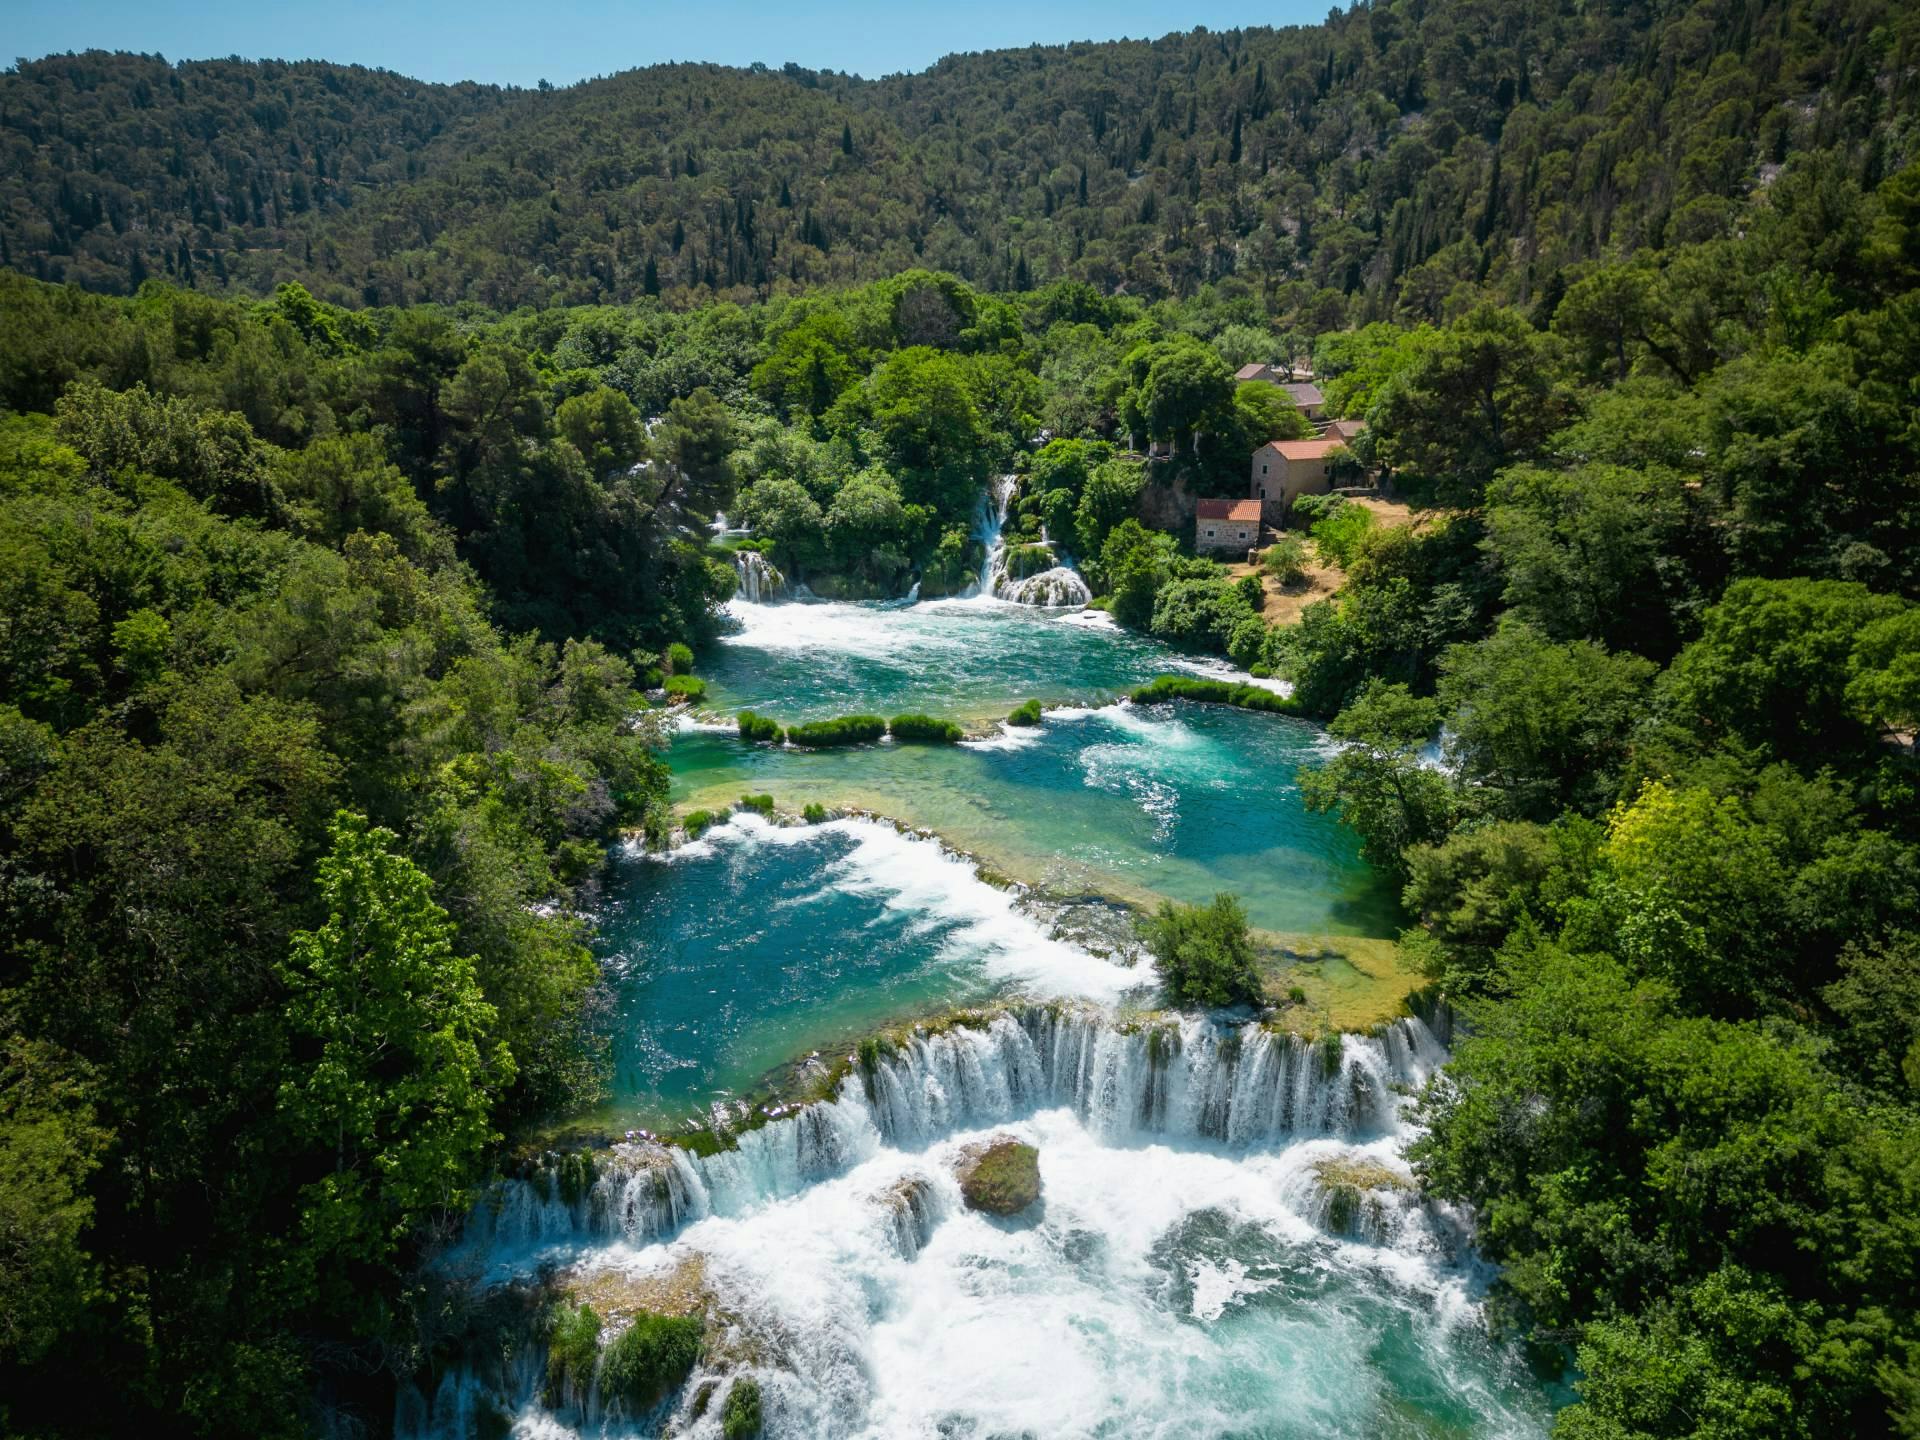 We will stay in the park for 2.5 h, so you can choose to explore it on your own or go on a guided tour. Enjoy the waterfall pools, take photos and find hidden paths in this place full of unique flora and fauna.